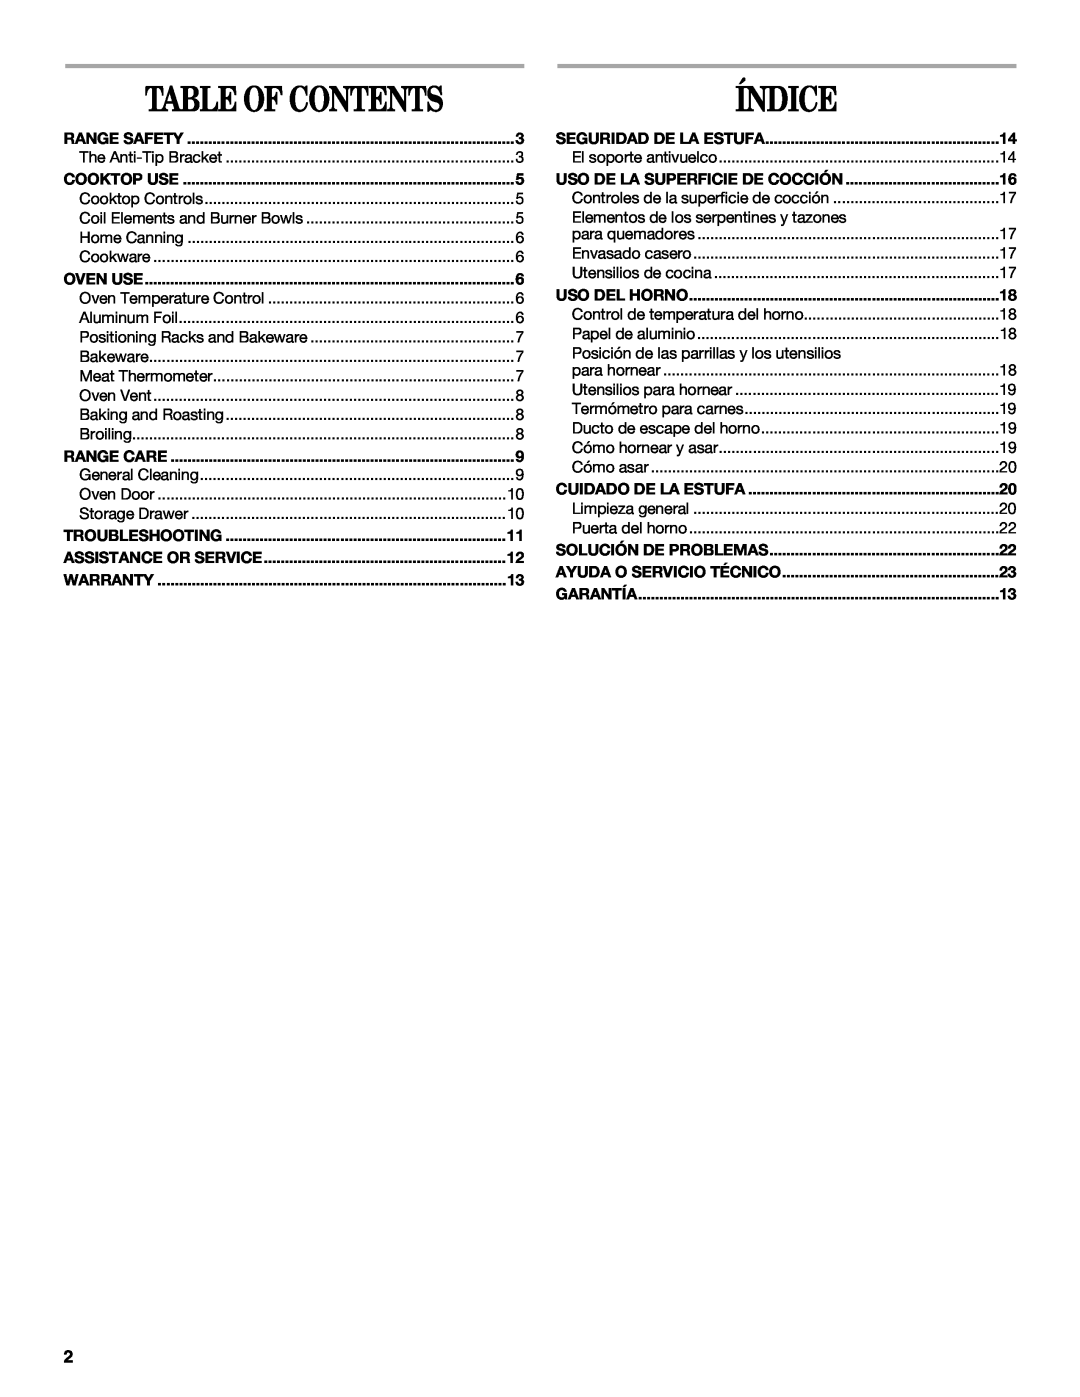 Amana AEP222VAW manual Table Of Contents, Índice 